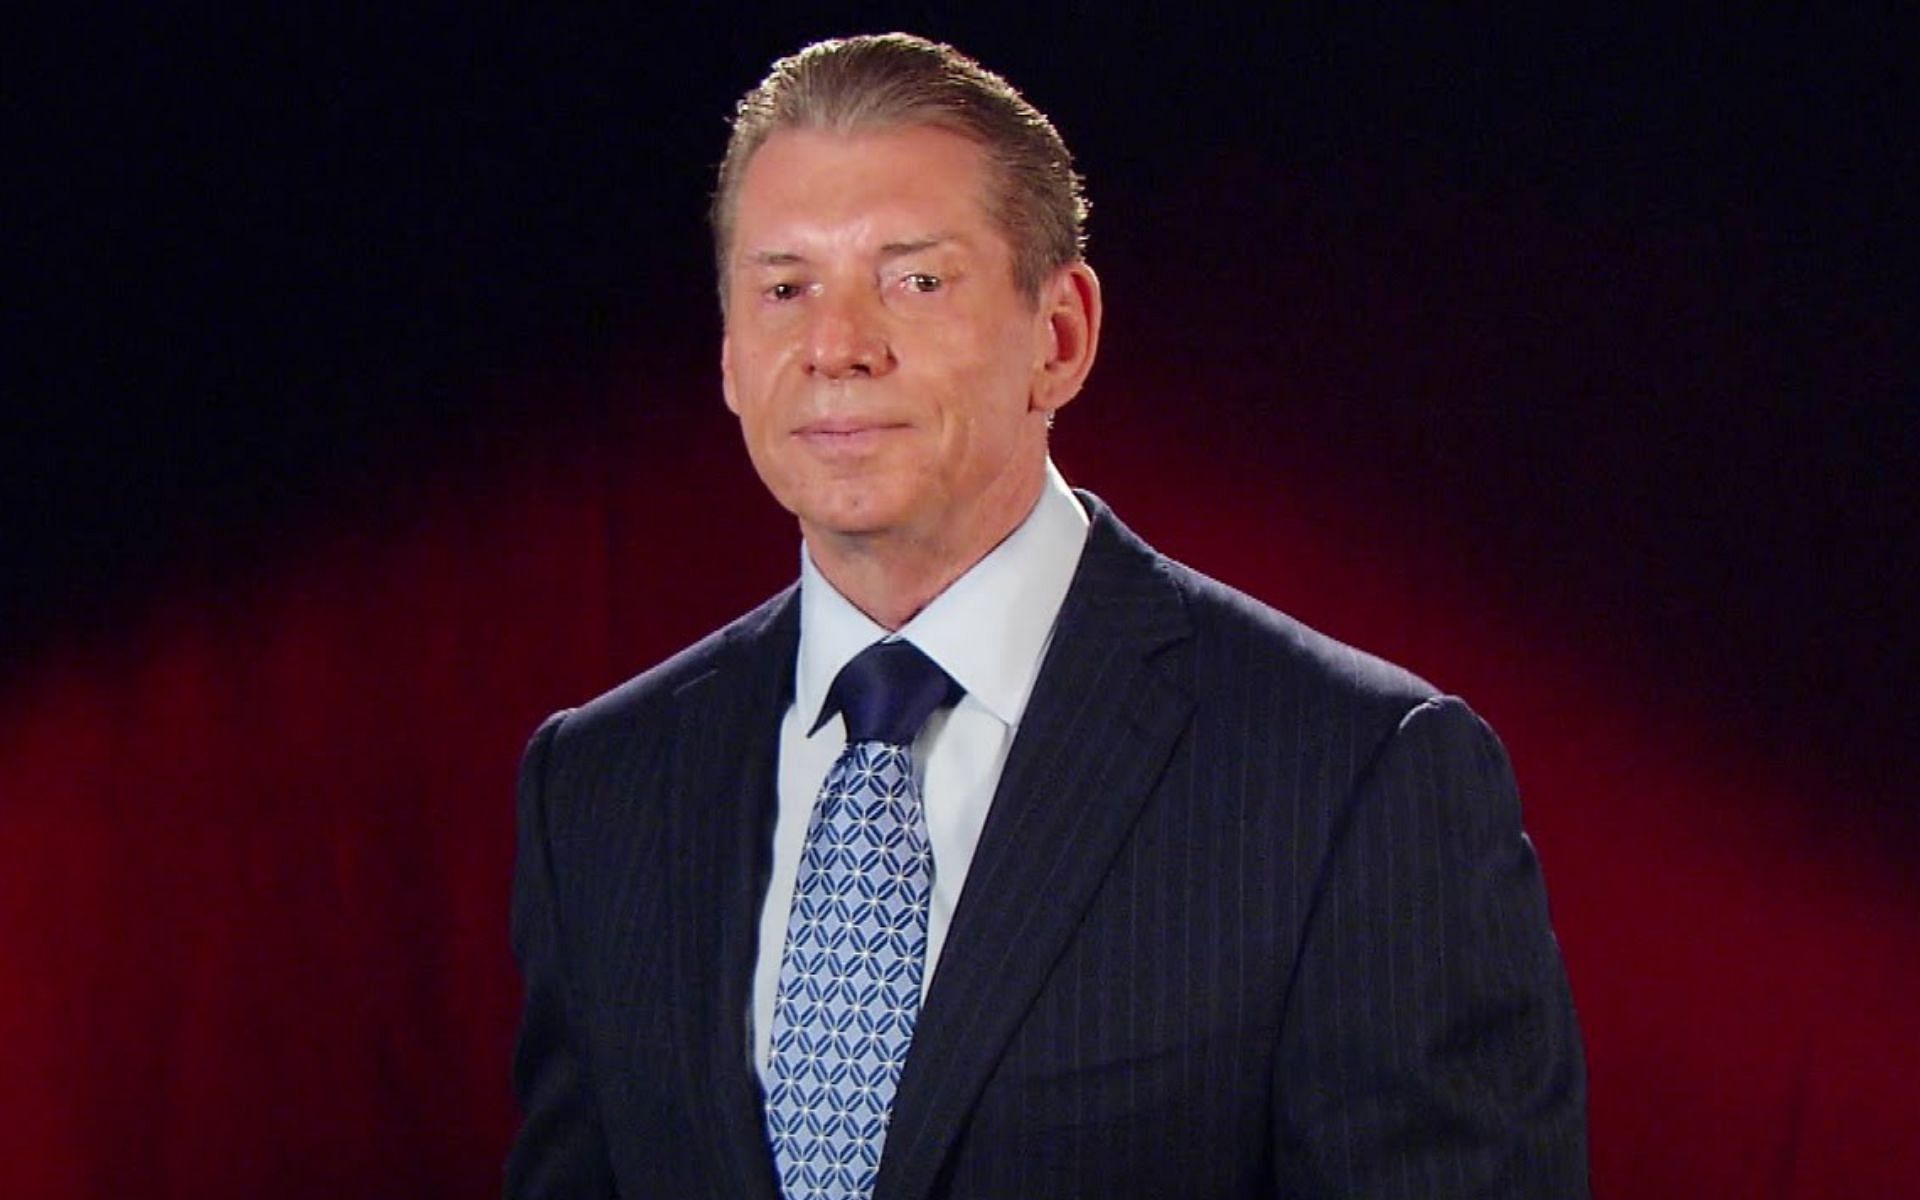 Vince McMahon recently retired from WWE!